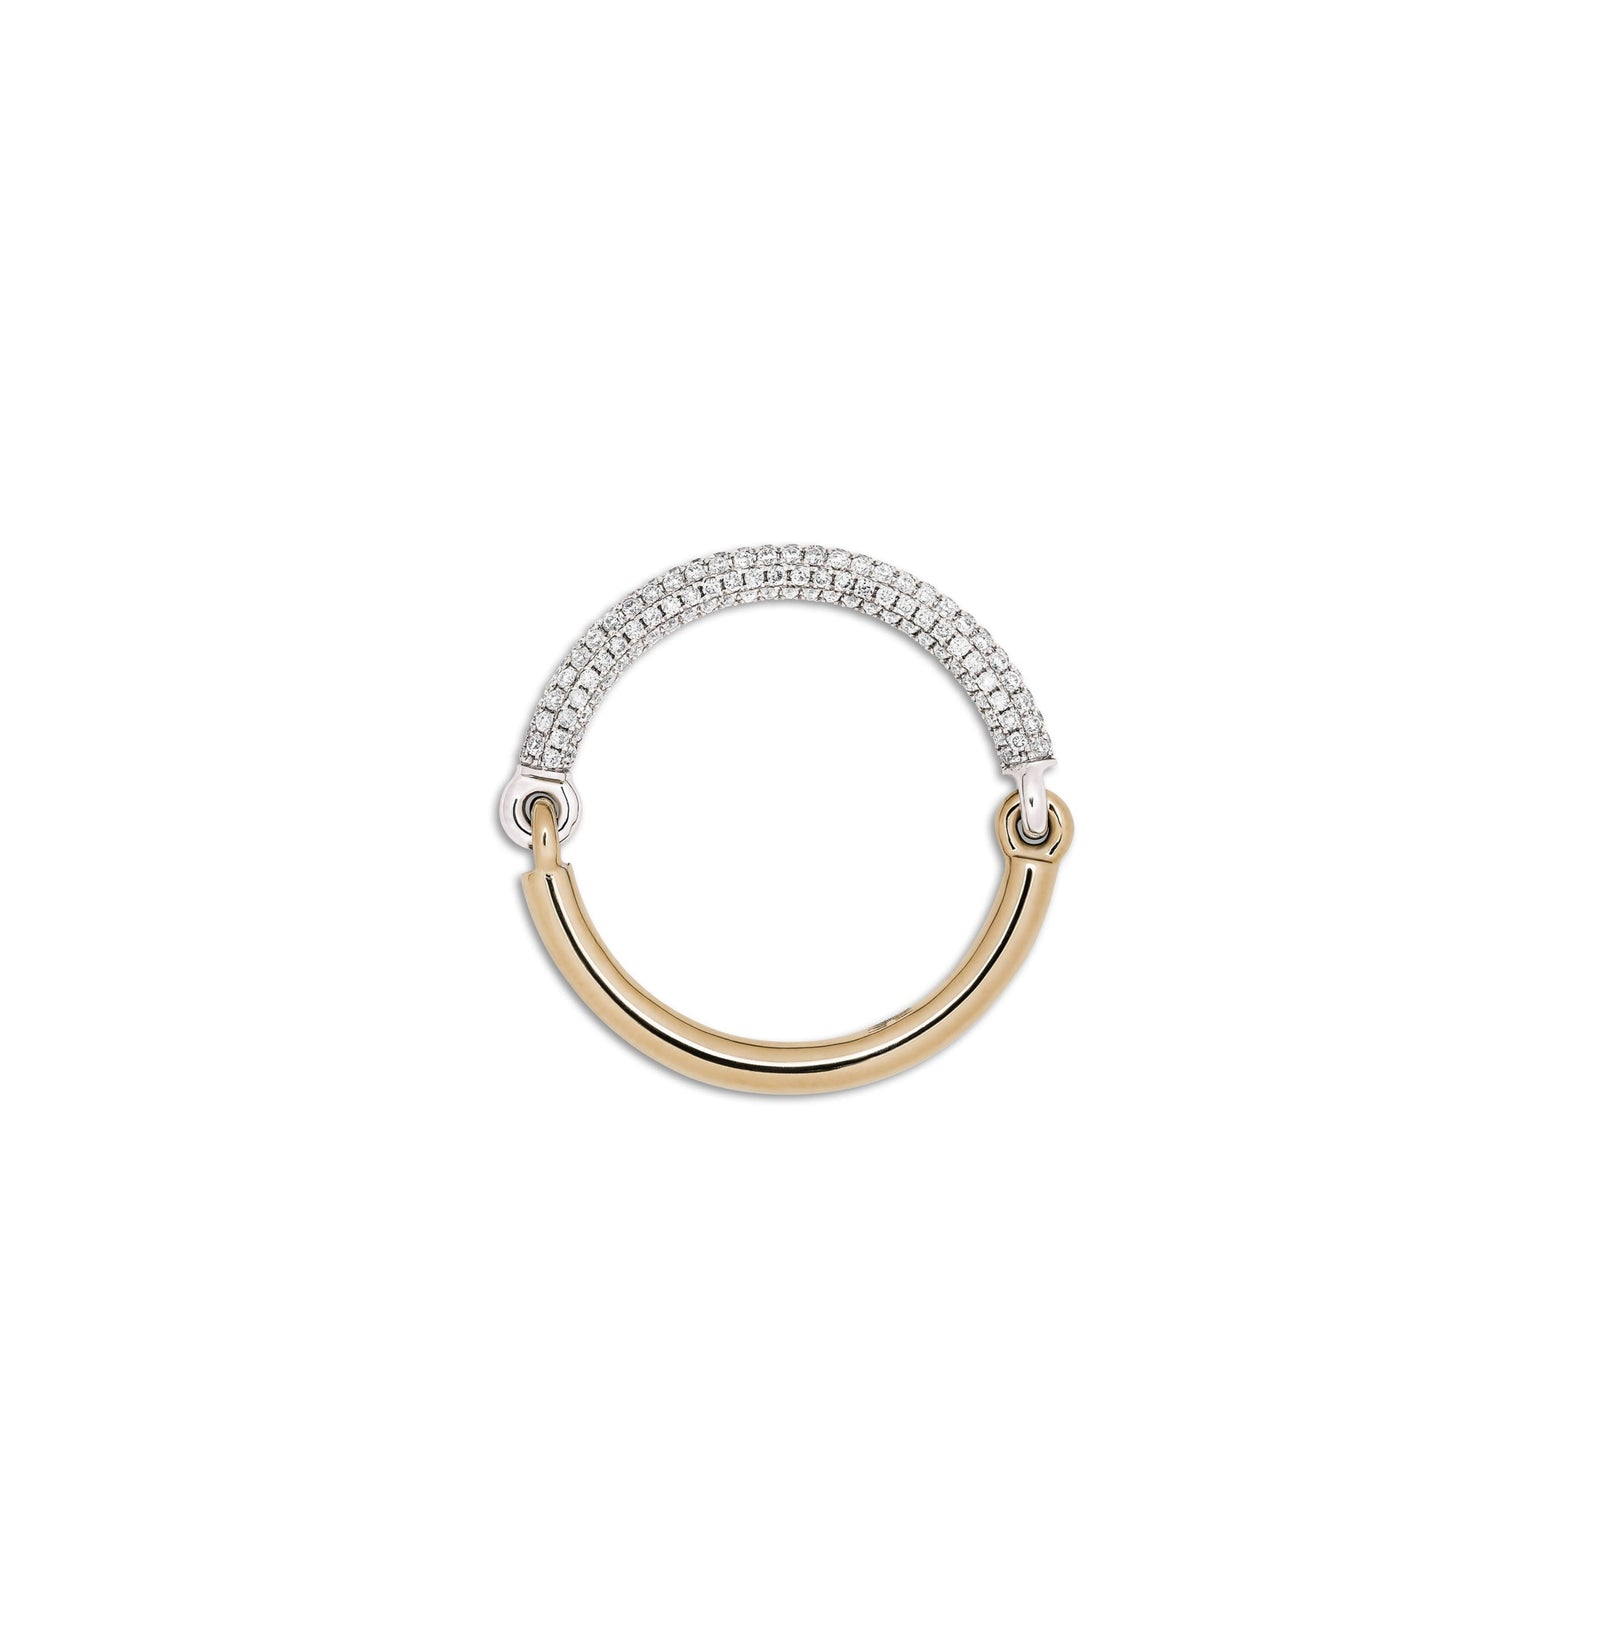 MAOR Aquila hinged band ring with white gold and yellow gold